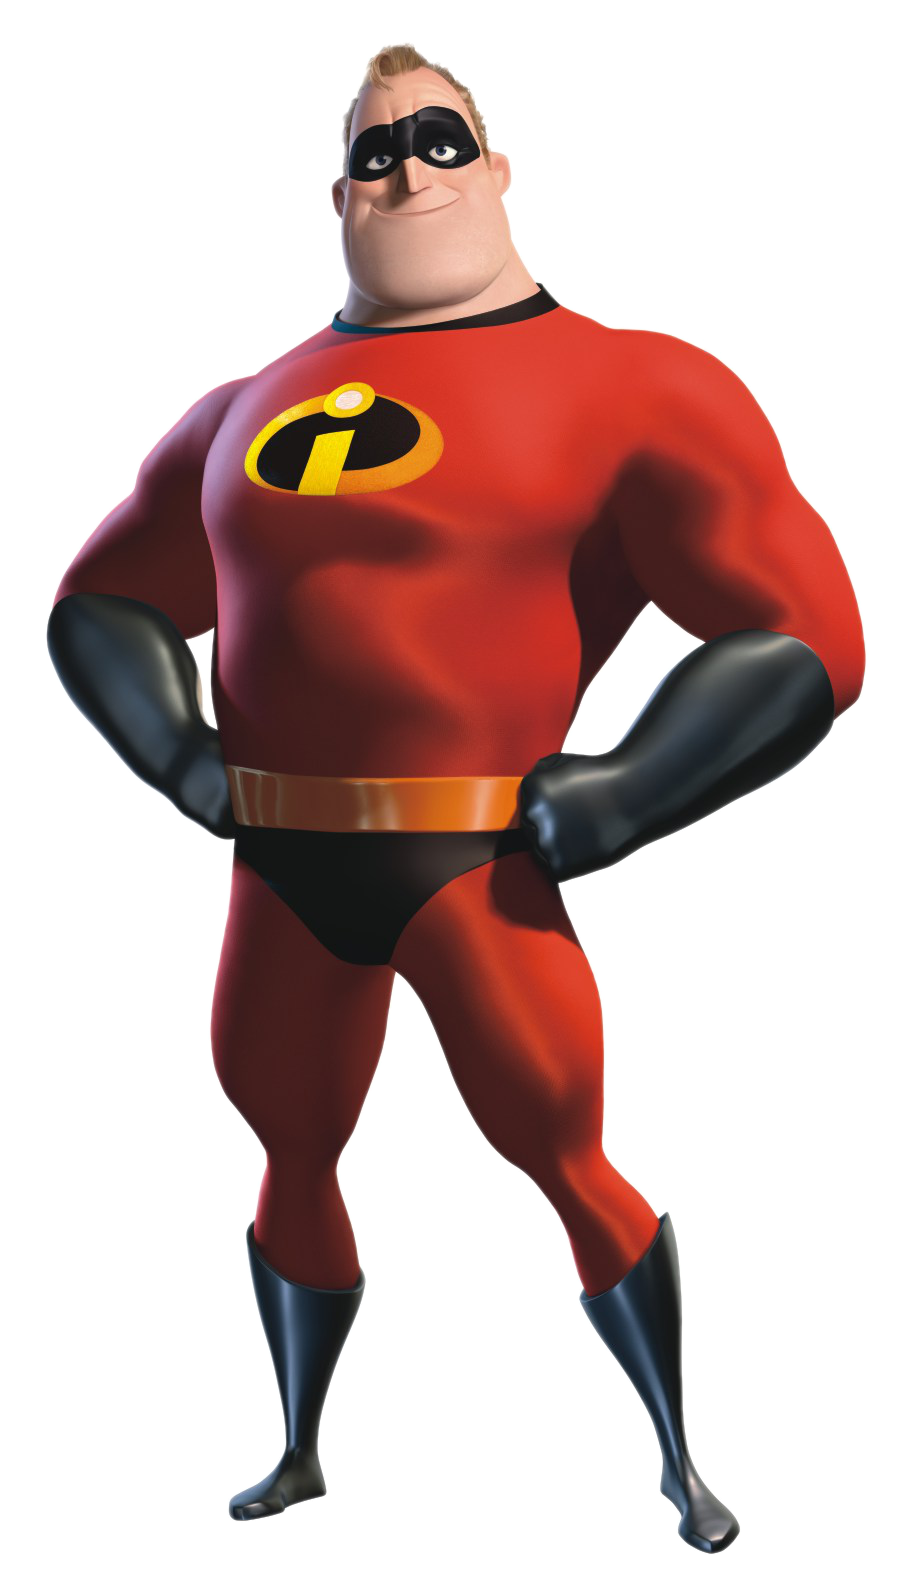 Marvelous Ticket Incredibles Improbable Bed PNG